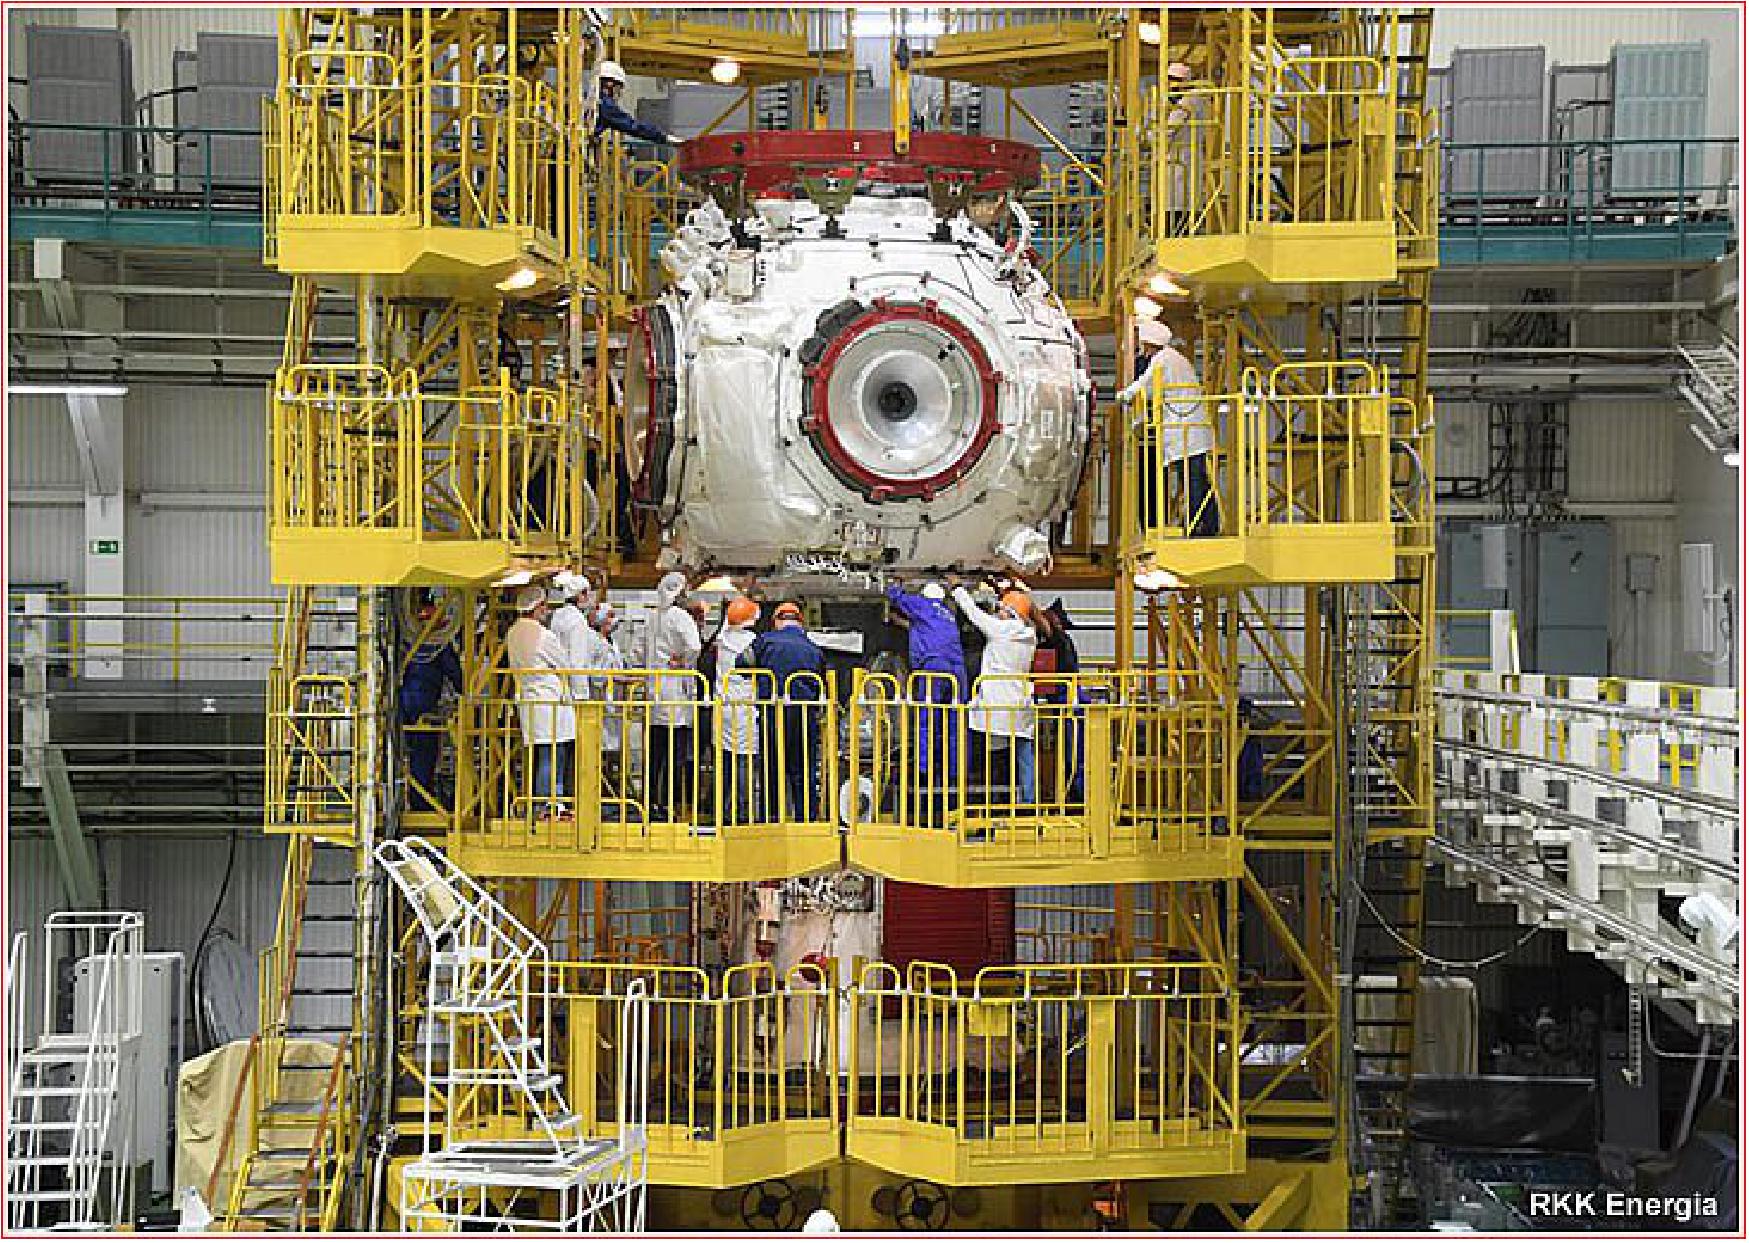 Figure 5: Prichal Node Module, UM, is being integrated with the Progress M-UM space tug on October 4, 2021 (image credit: RKK Energia, Anatoly Zak)